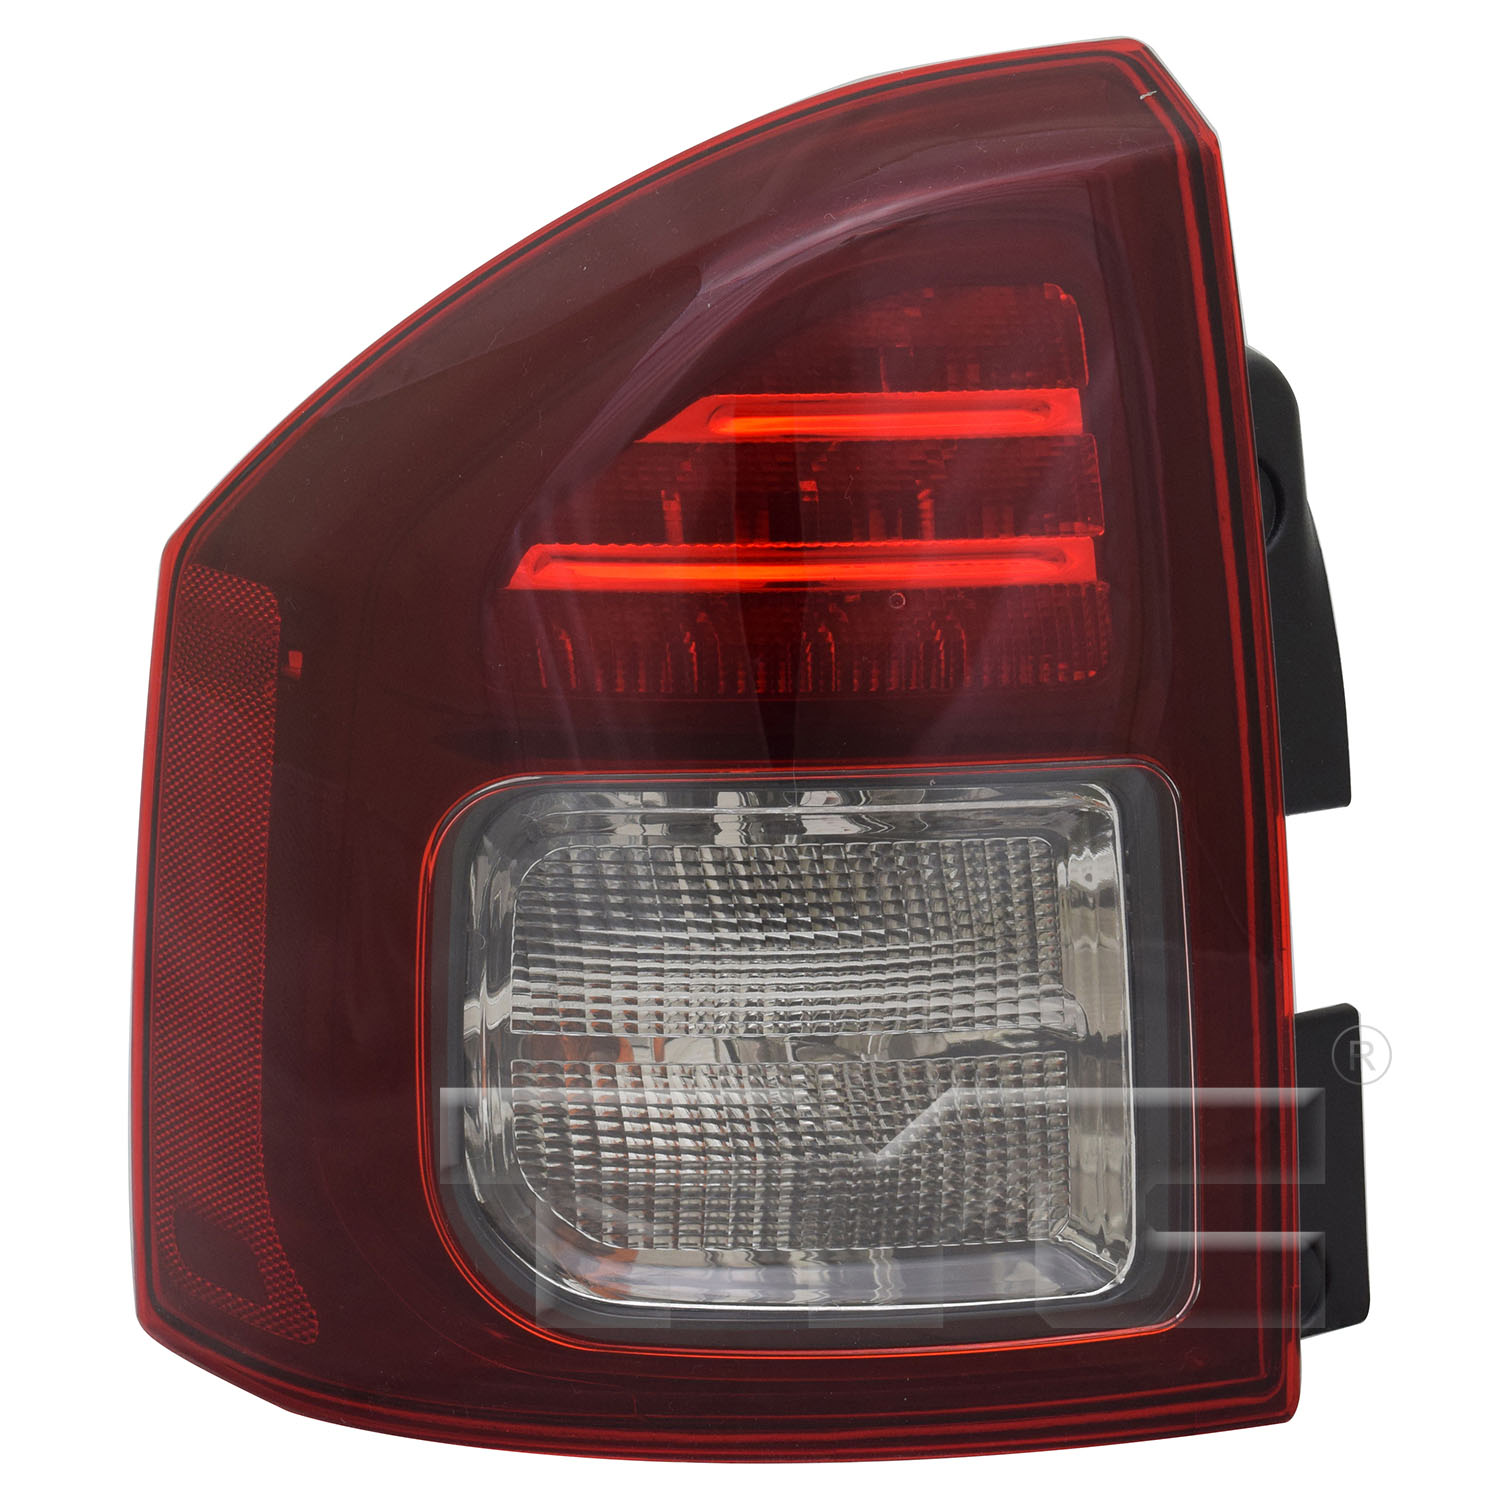 Aftermarket TAILLIGHTS for JEEP - COMPASS, COMPASS,14-17,LT Taillamp assy